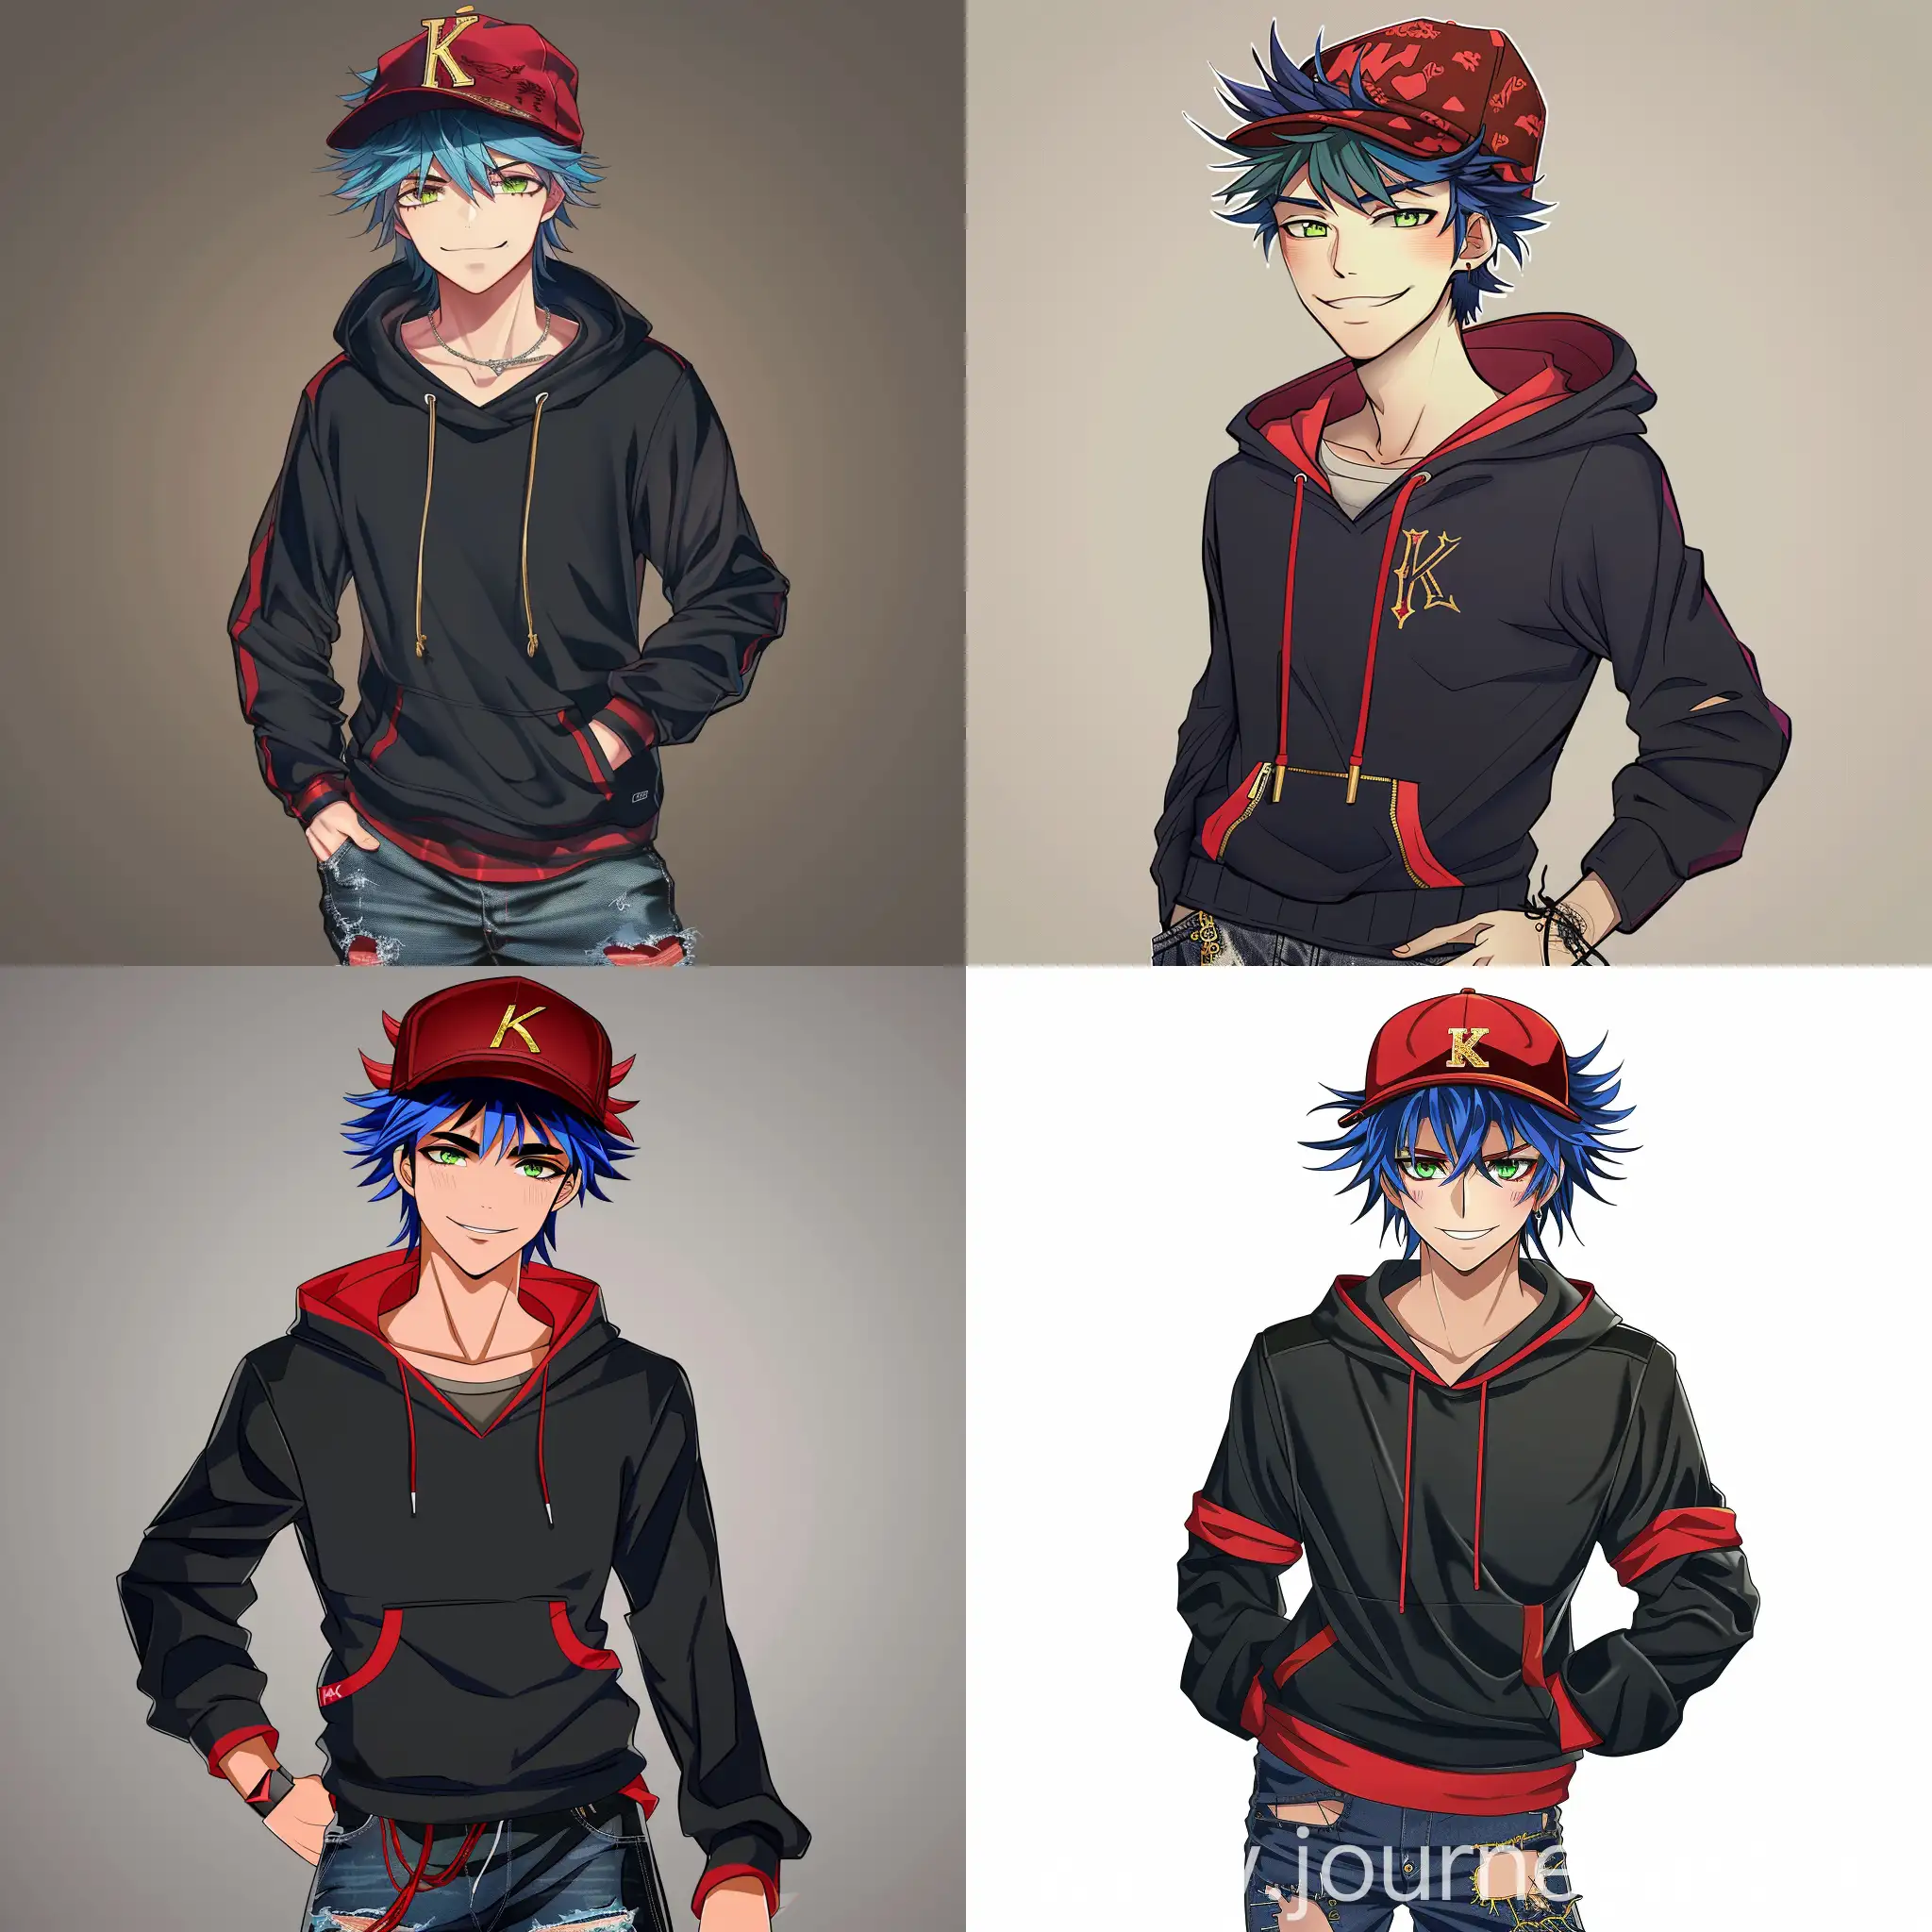 Confident-Anime-Guy-with-Spiky-Blue-Hair-and-Red-Cap